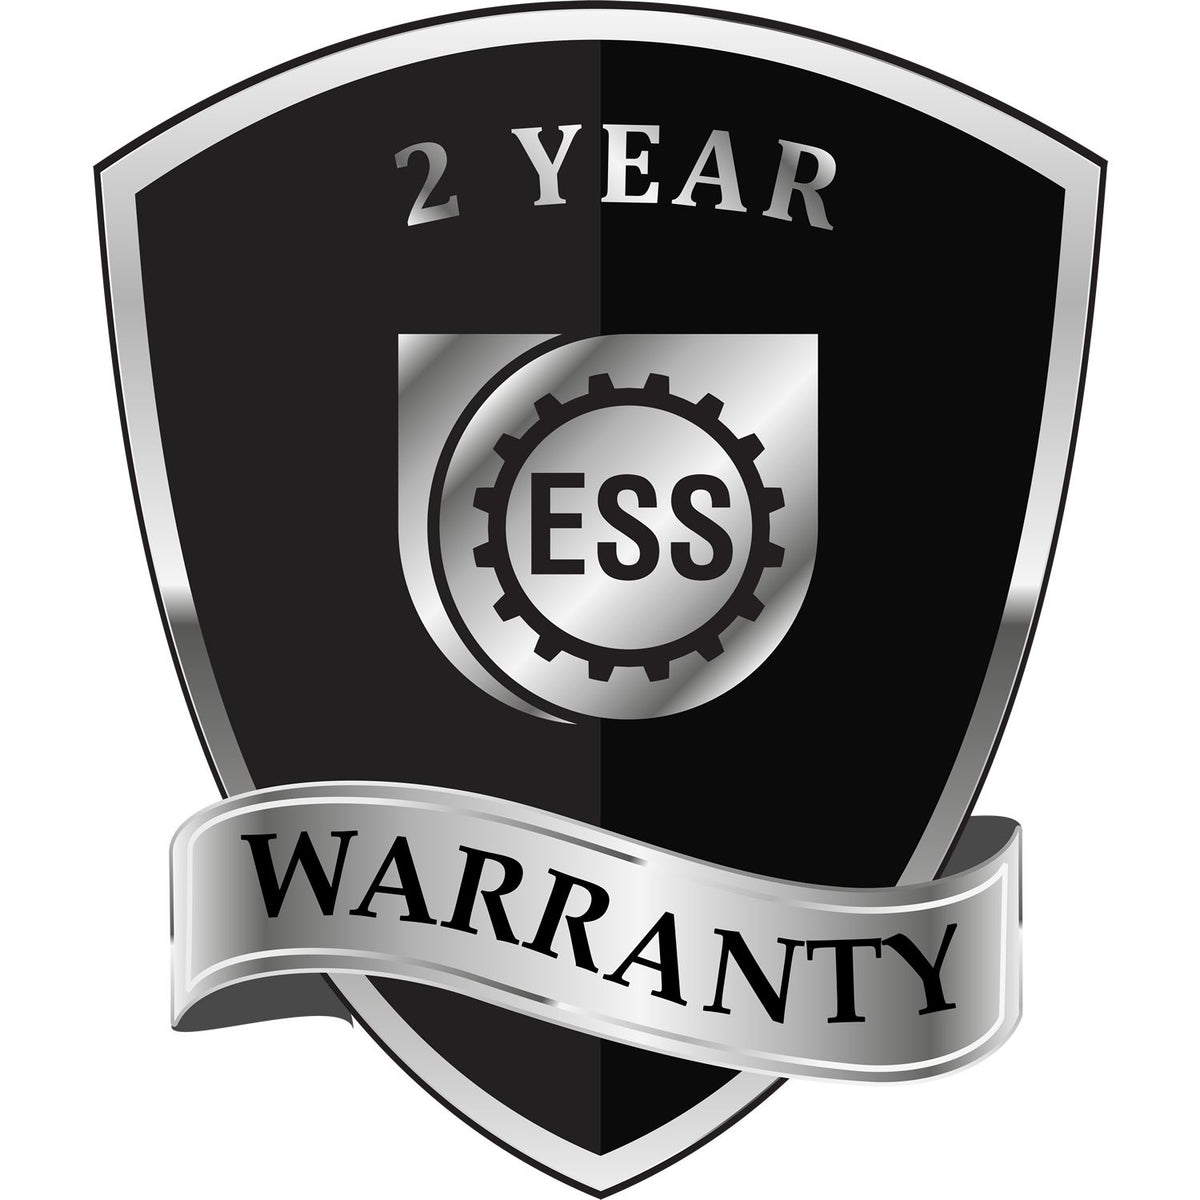 A badge or emblem showing a warranty icon for the Soft New Hampshire Professional Engineer Seal